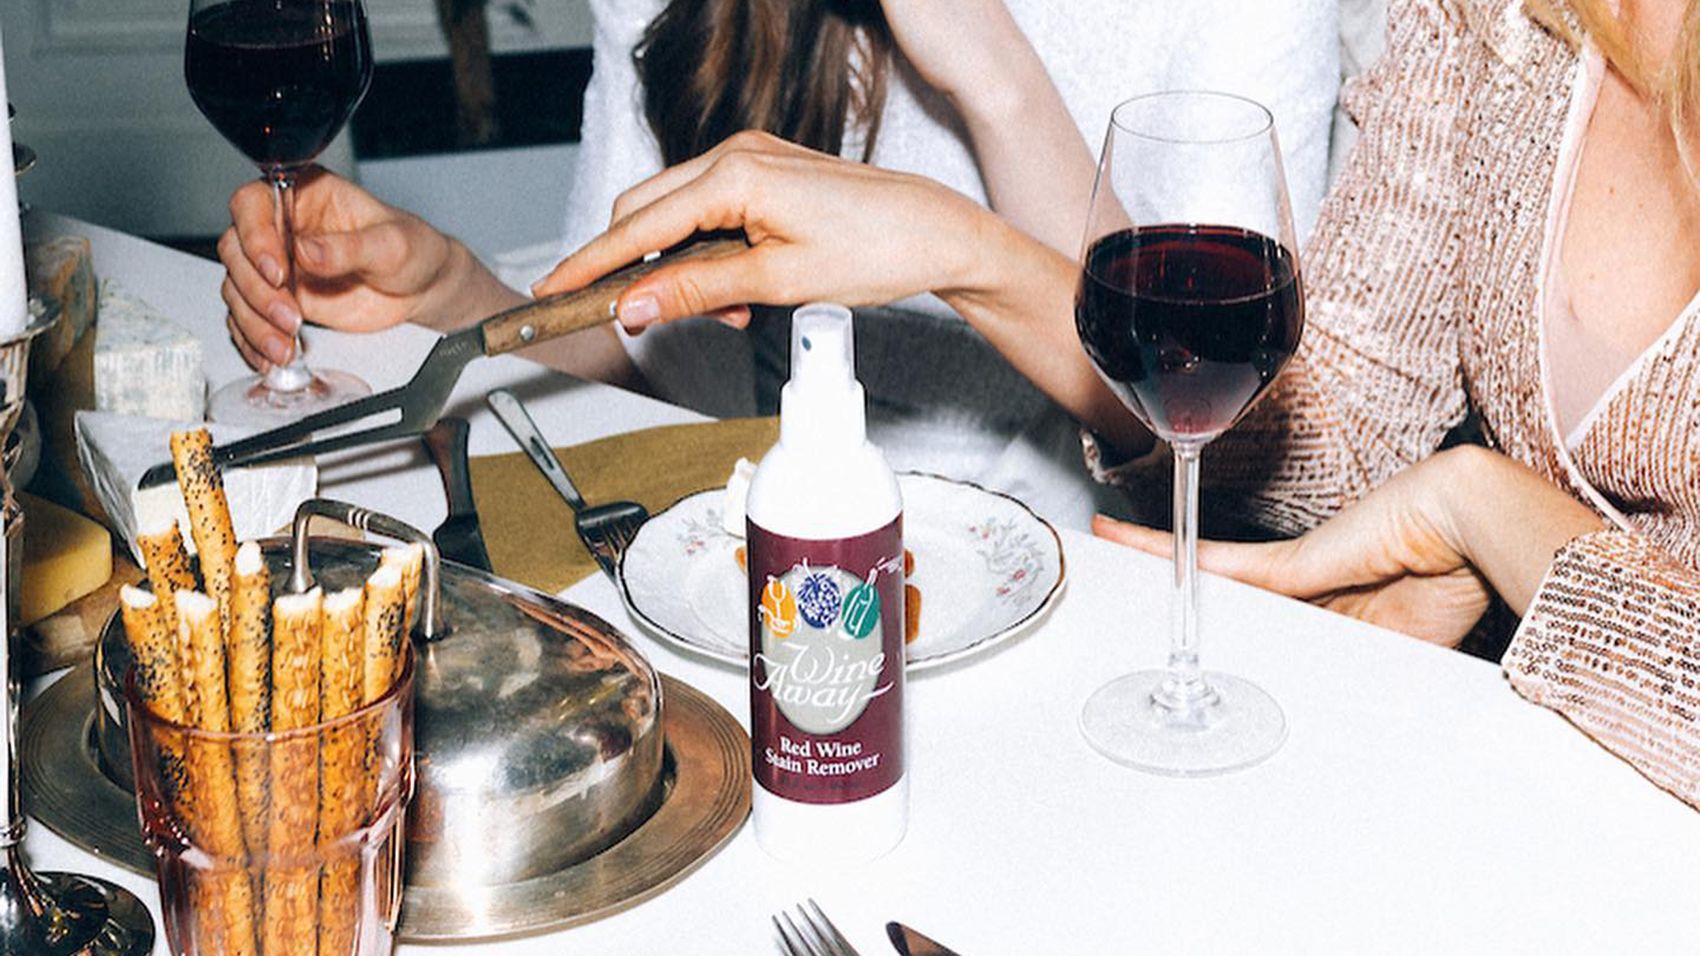 4 Ways to Remove Red Wine Stains from Your Clothes, Carpet, and More